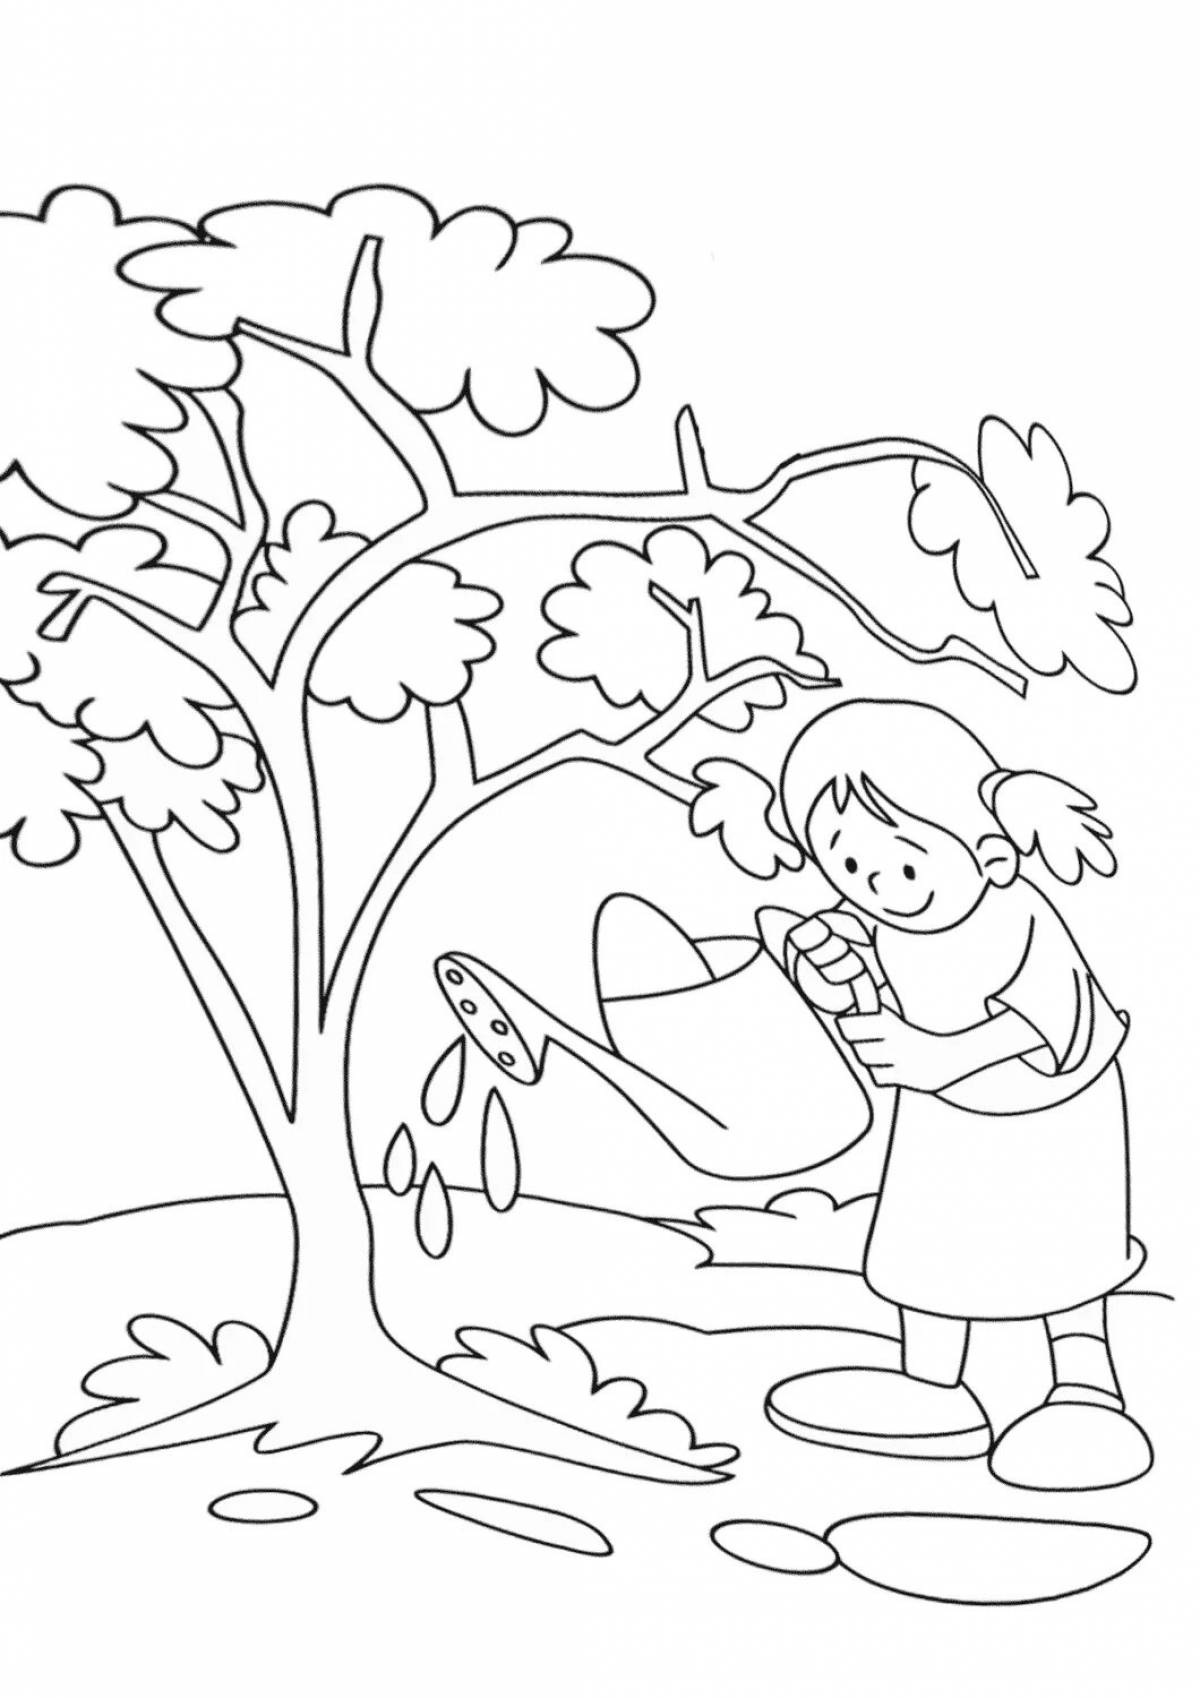 Creative coloring book take care of nature for preschoolers on ecology